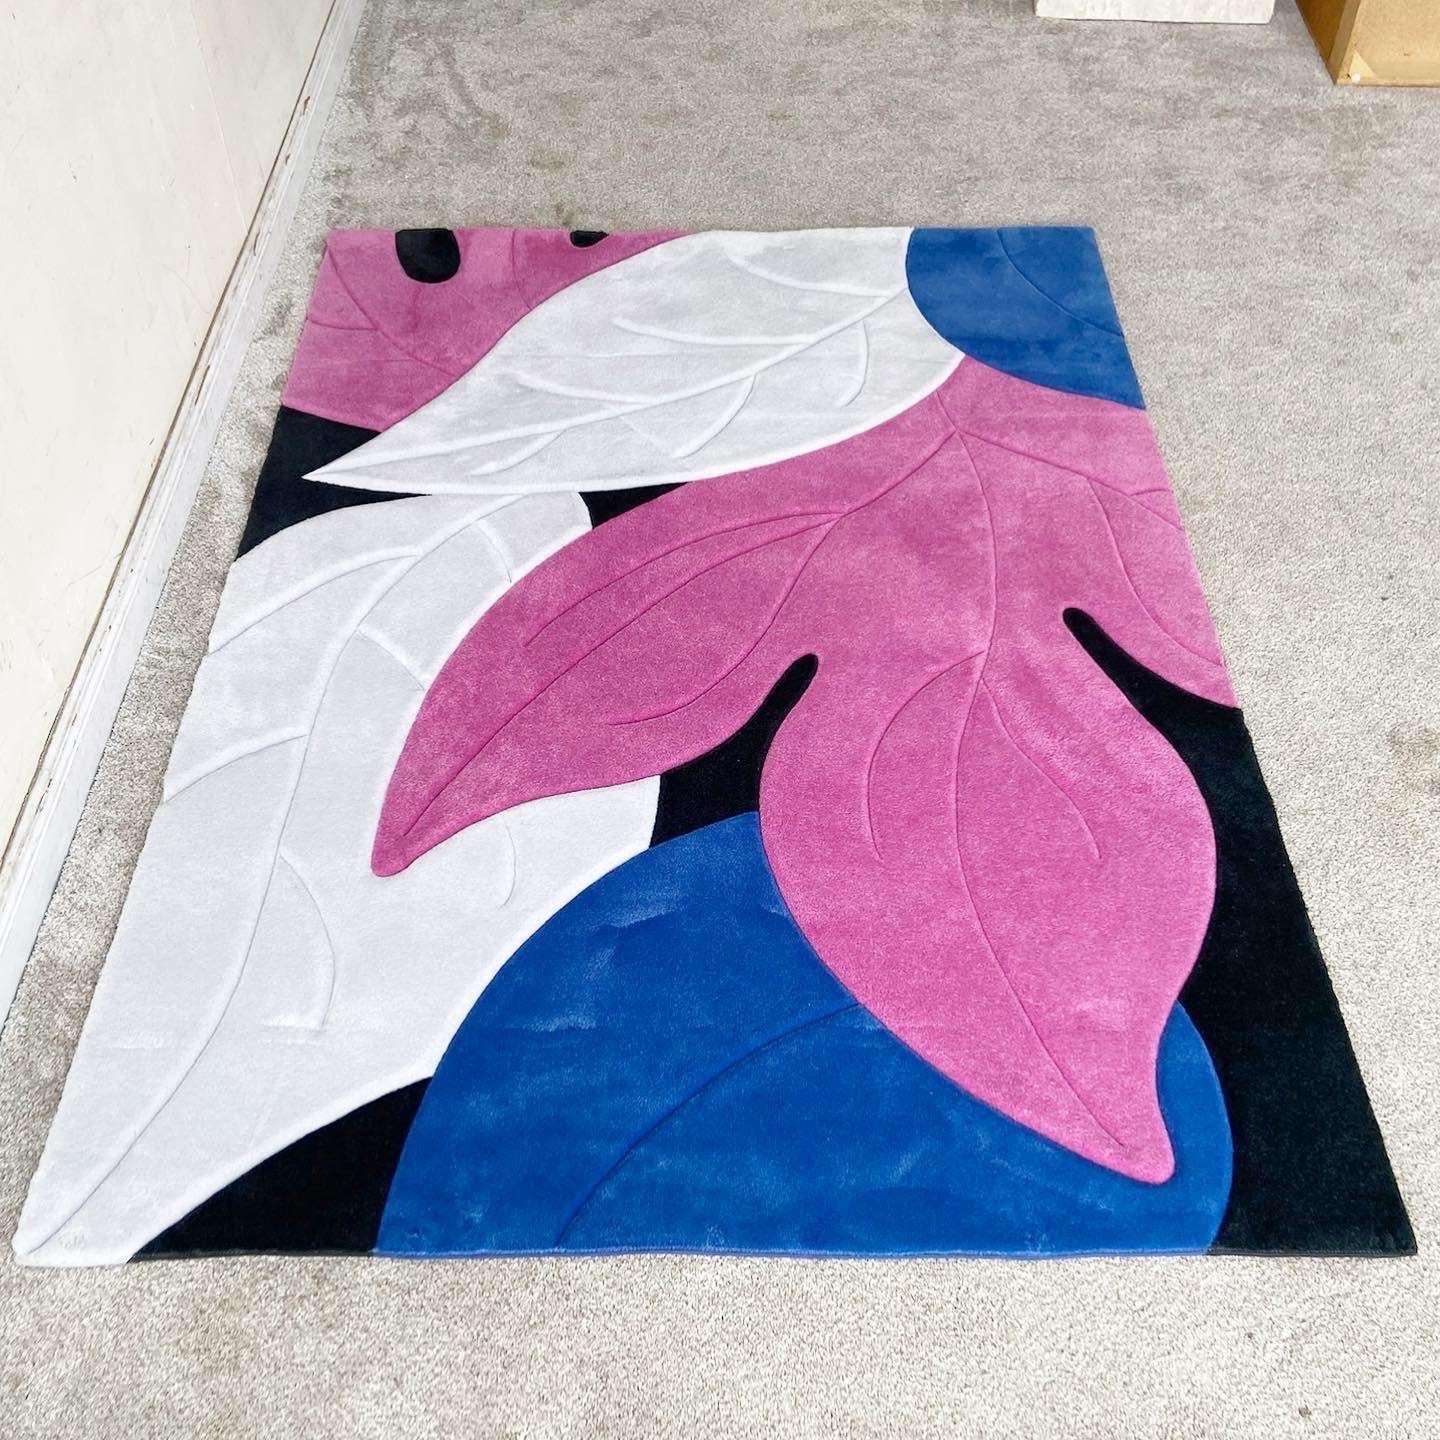 Postmodern Sculpted Blue White and Pink Foliage Rectangular Area Rug In Good Condition For Sale In Delray Beach, FL